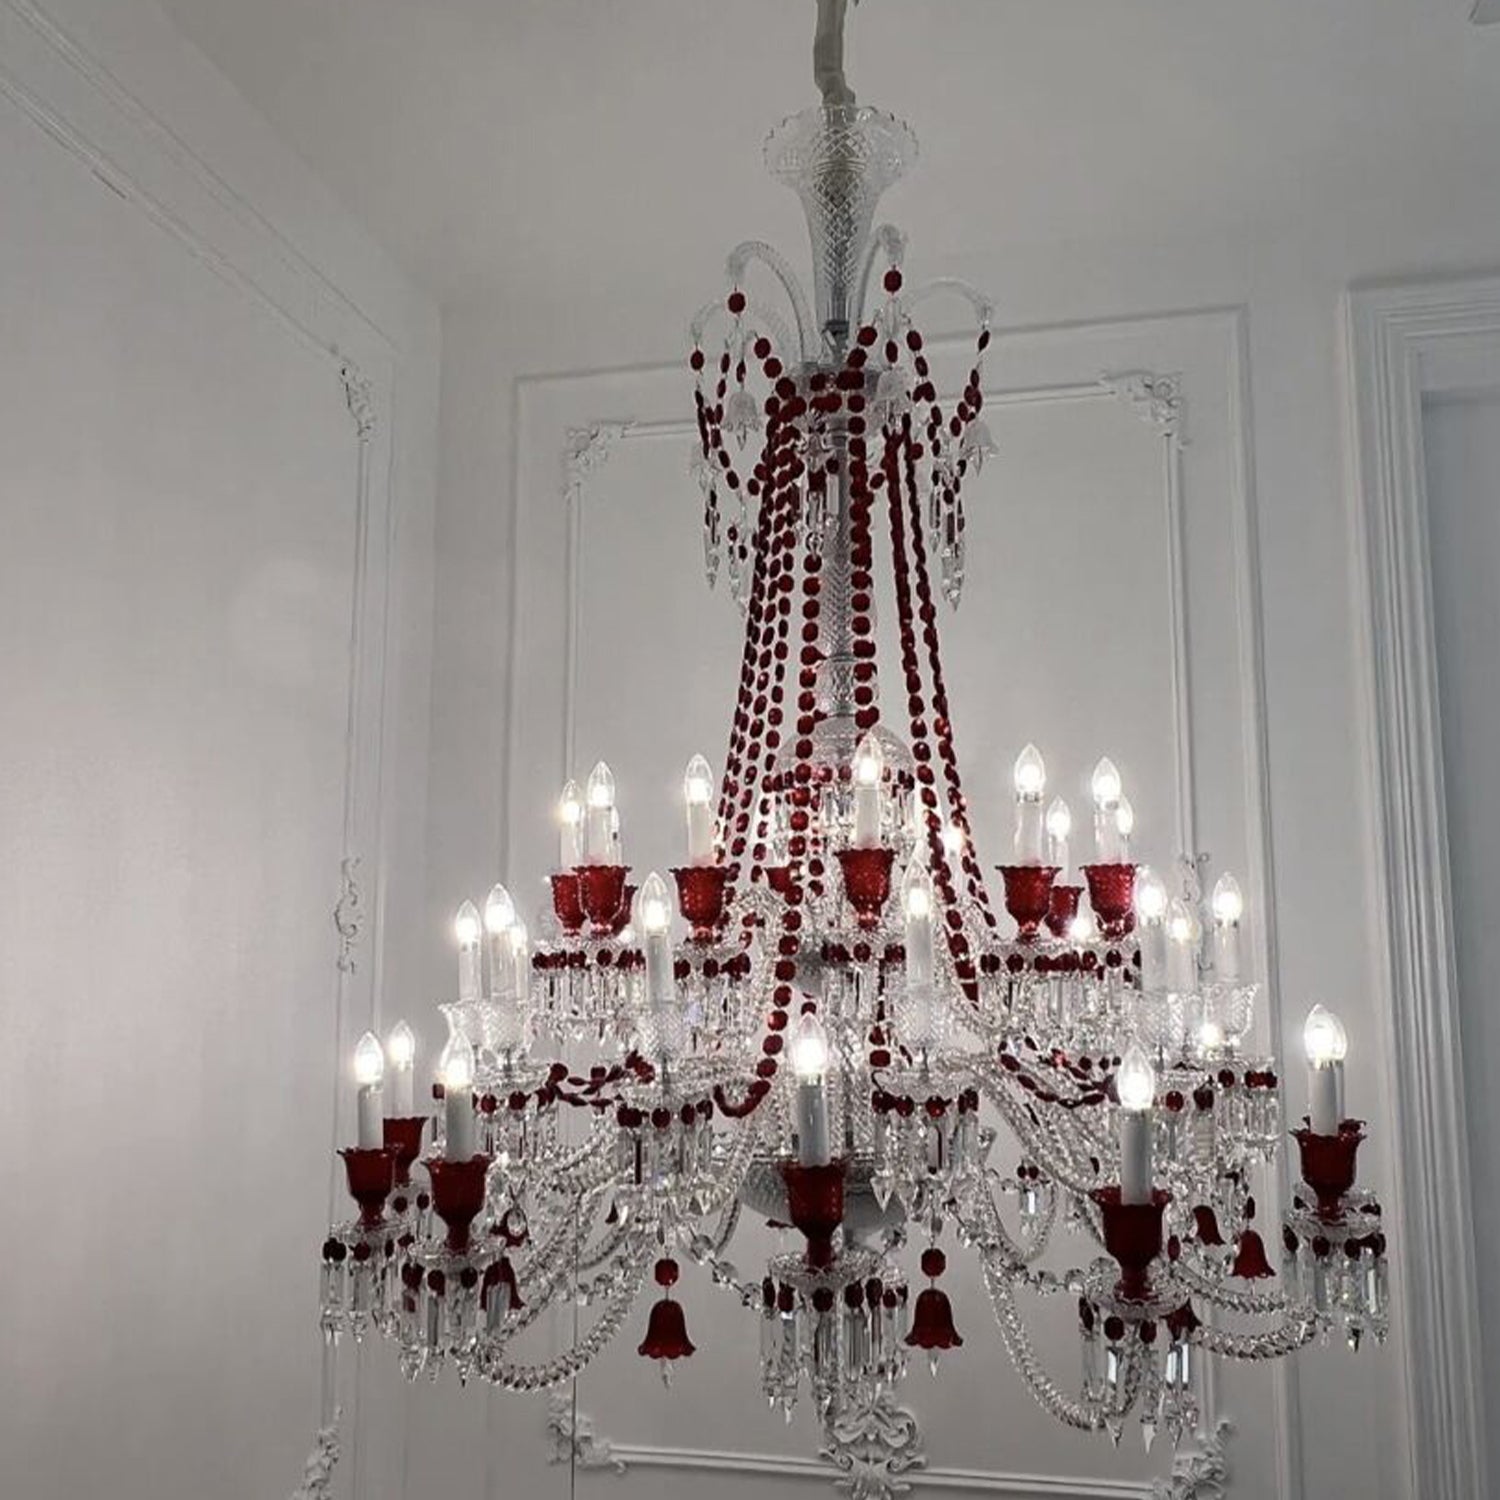 European-style Luxury Colorful Candle Crystal Oversized Chandelier Art Designer Foyer/Staircase Light Fixture Chandeliers Kevinstudiolives 12Lights:D31.5"*H37.4" Red Warm Light